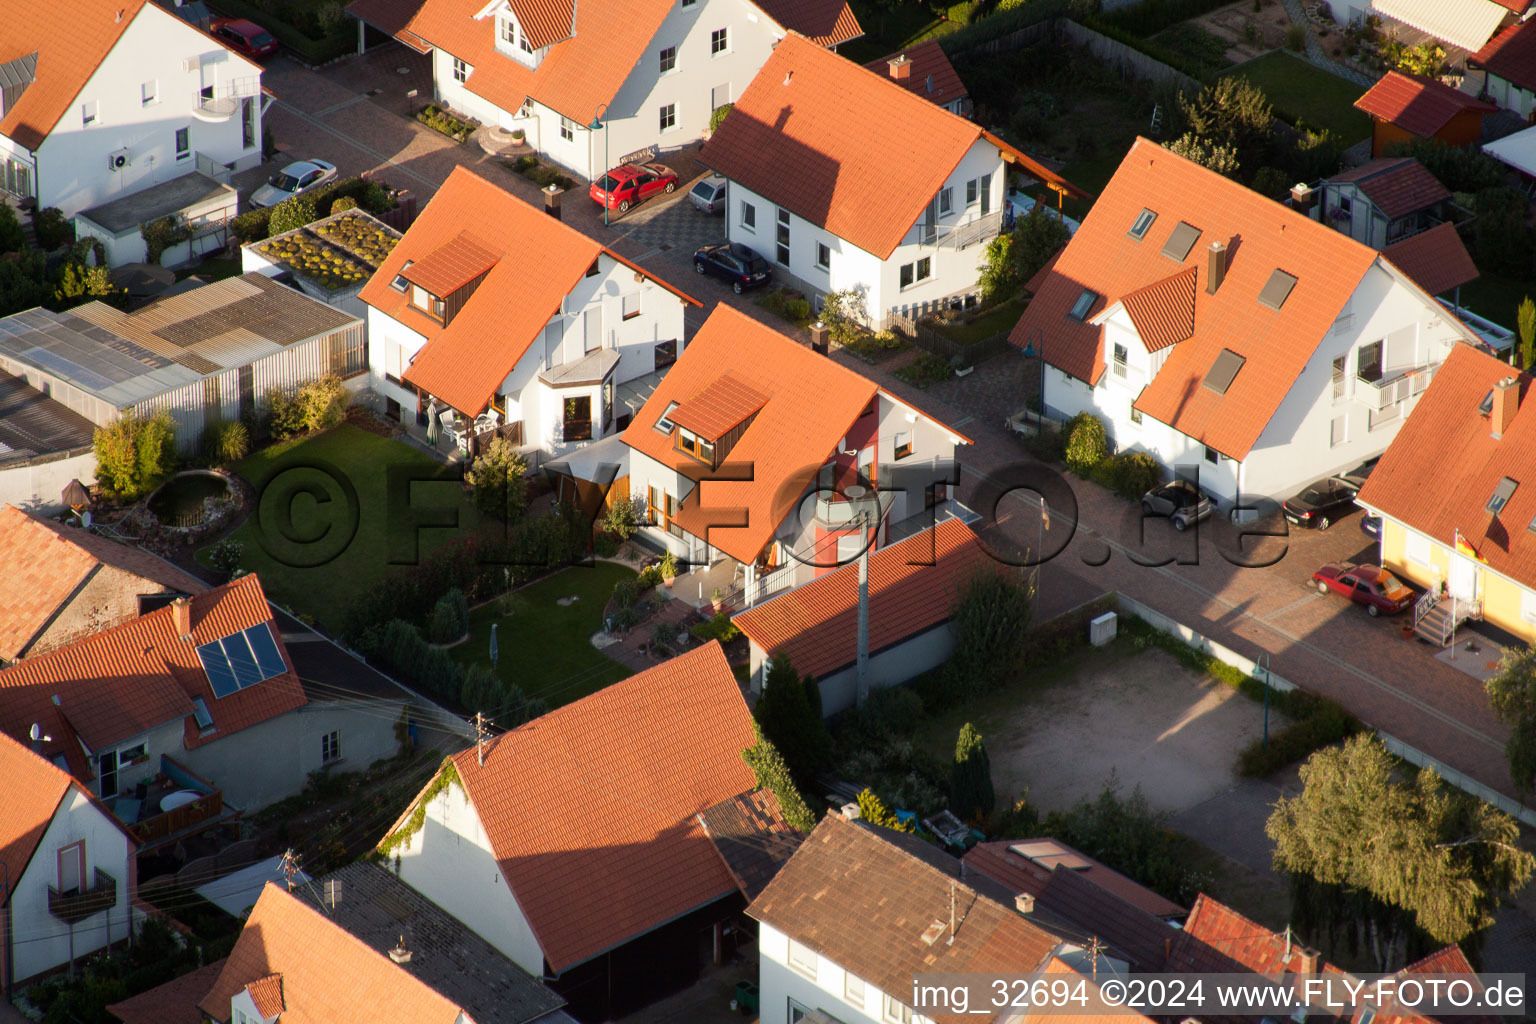 Aerial photograpy of In the stork's nest in Erlenbach bei Kandel in the state Rhineland-Palatinate, Germany